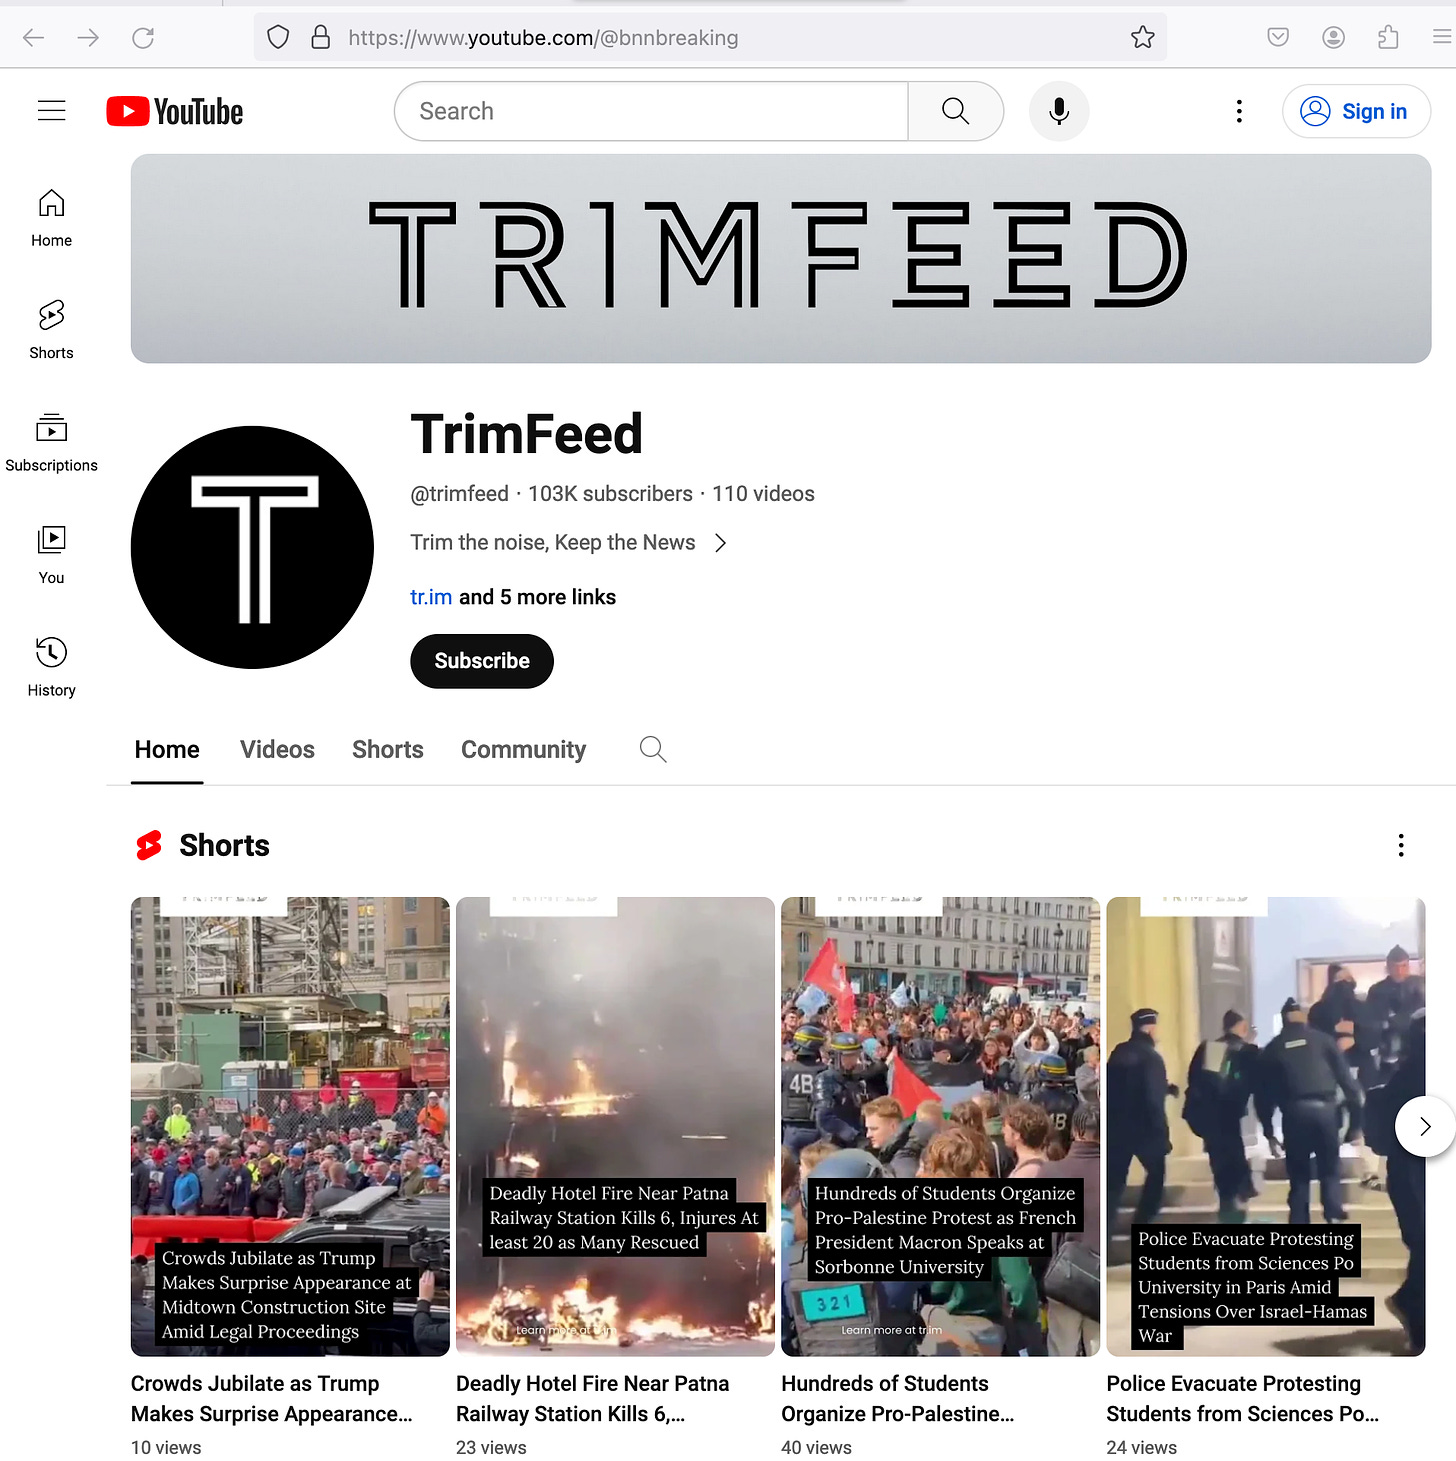 screenshot of the Trimfeed Youtube channel, with @bnnbreaking handle visible in the address bar